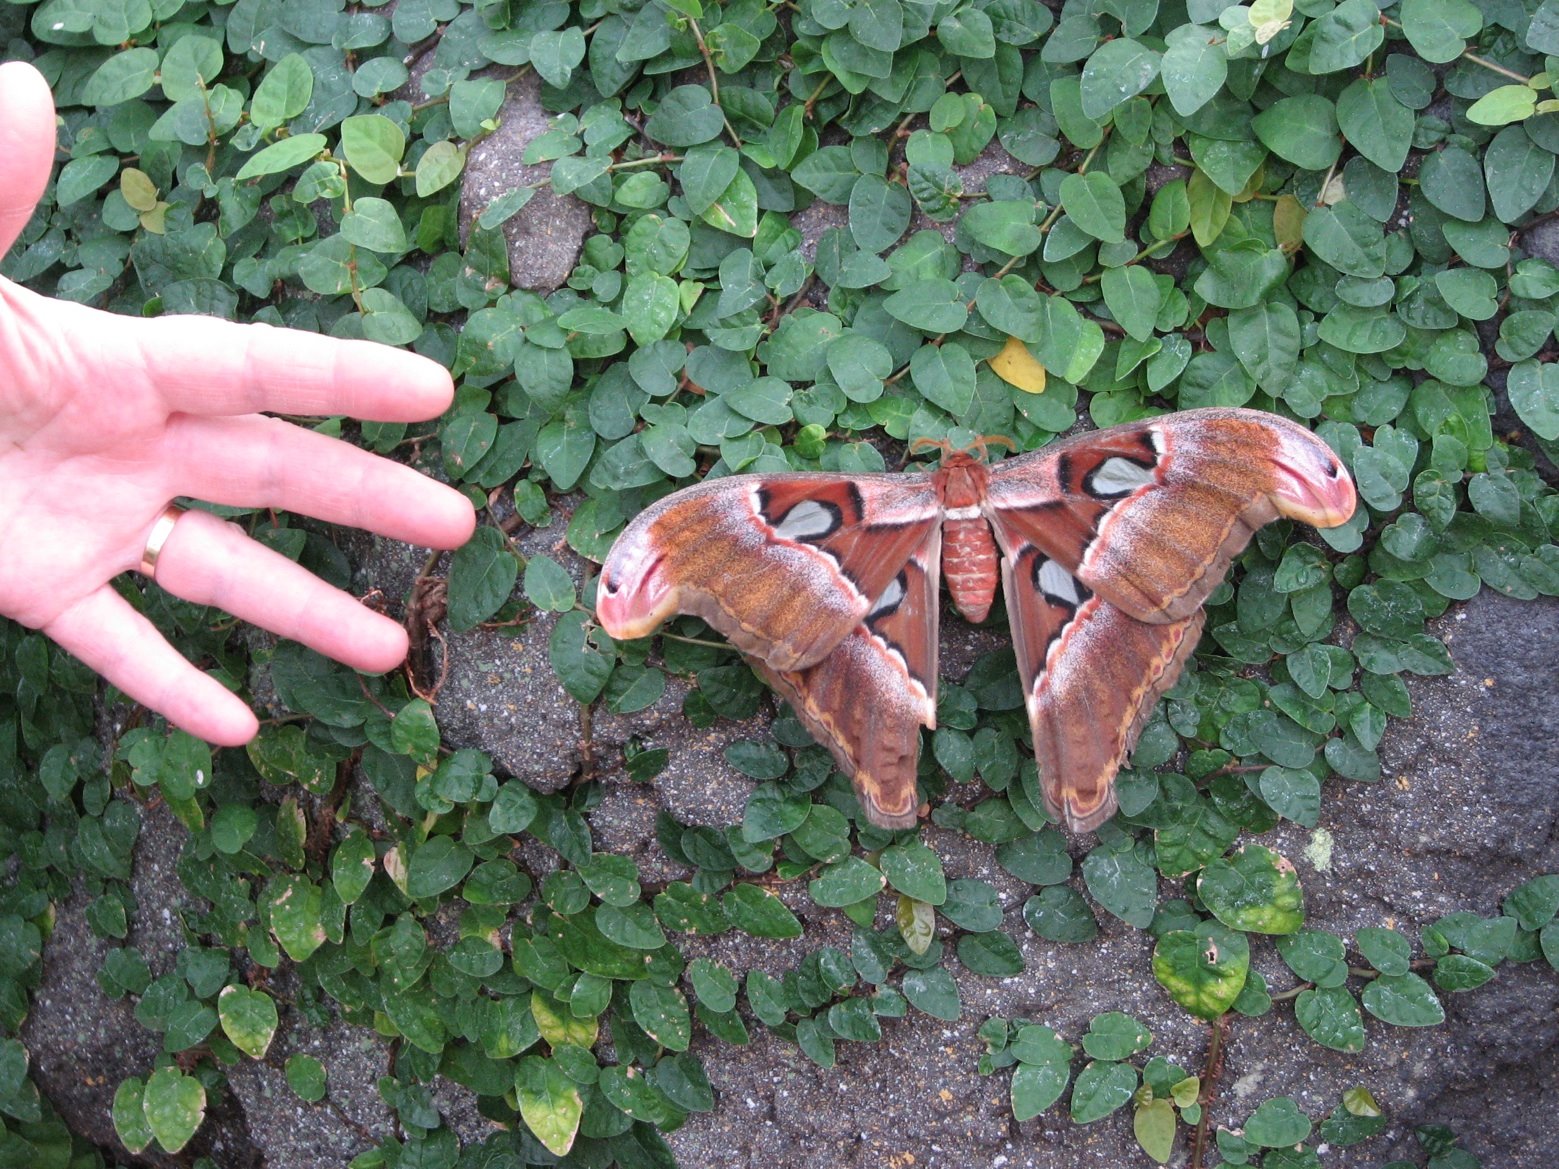 [butterfly+and+hand.jpg]